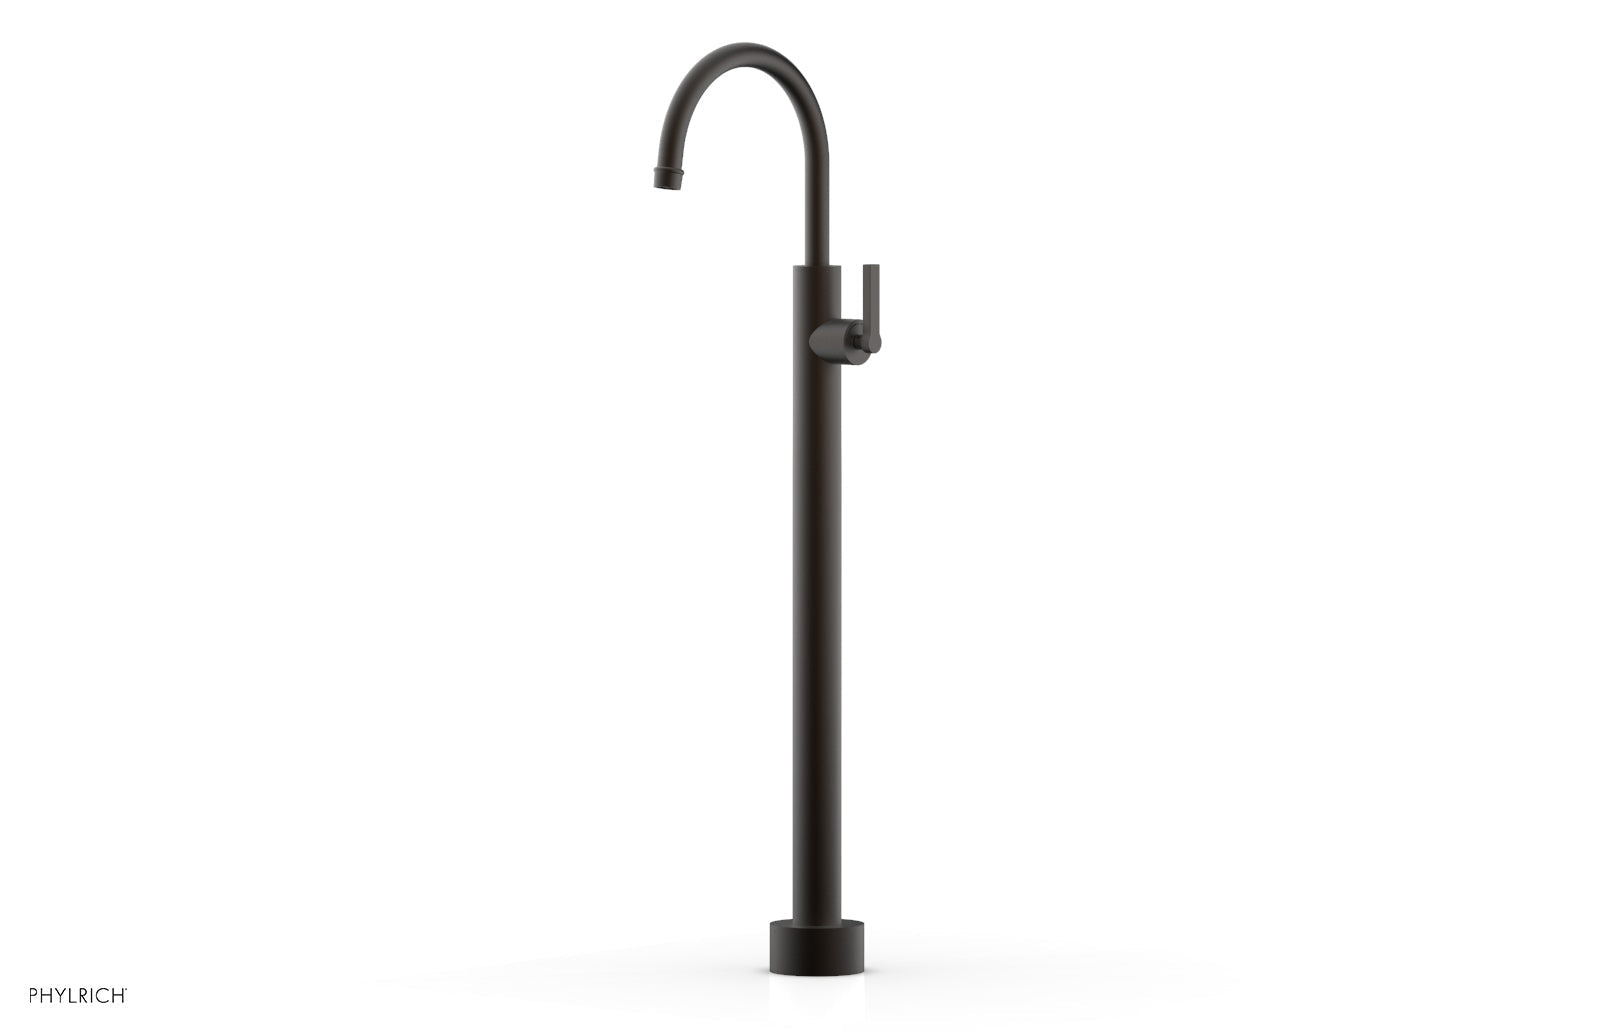 Phylrich HEX MODERN Tall Floor Mount Tub Filler - Lever Handle